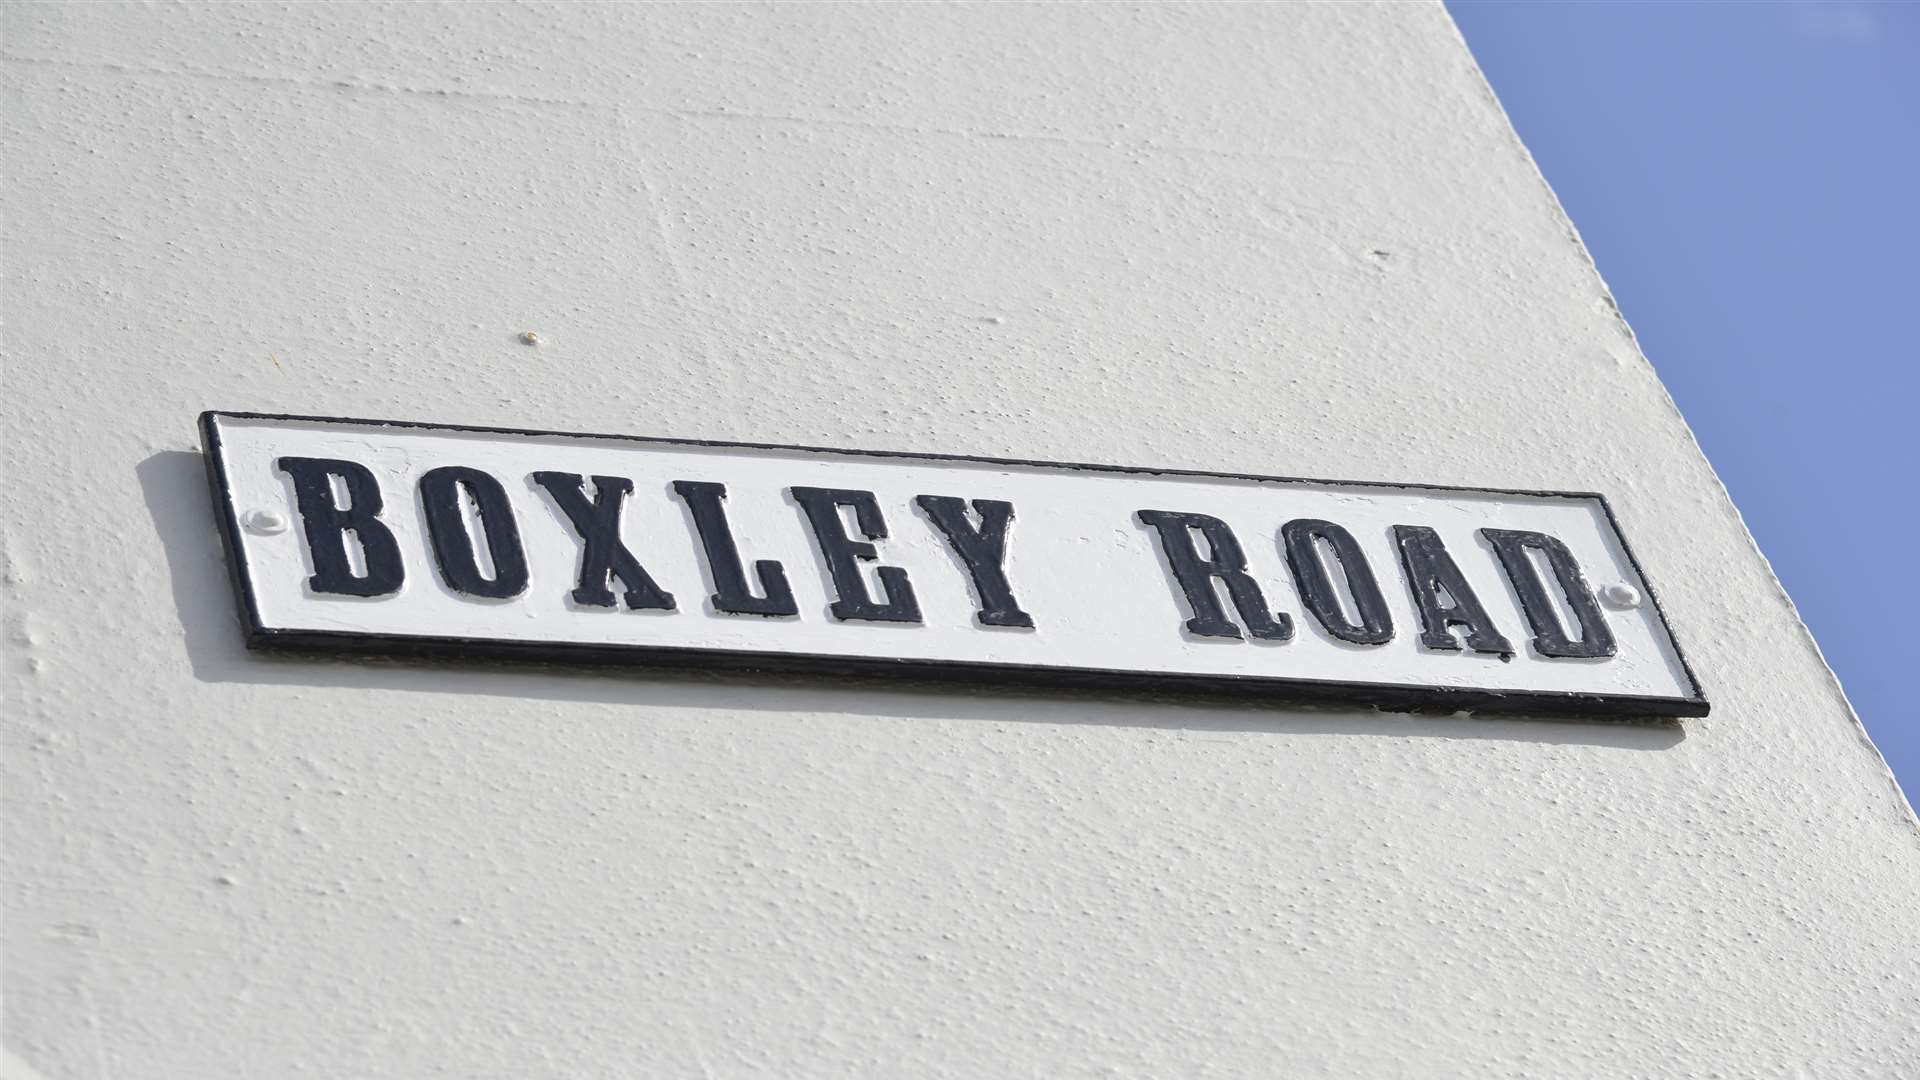 The accident happened in Boxley Road, Maidstone